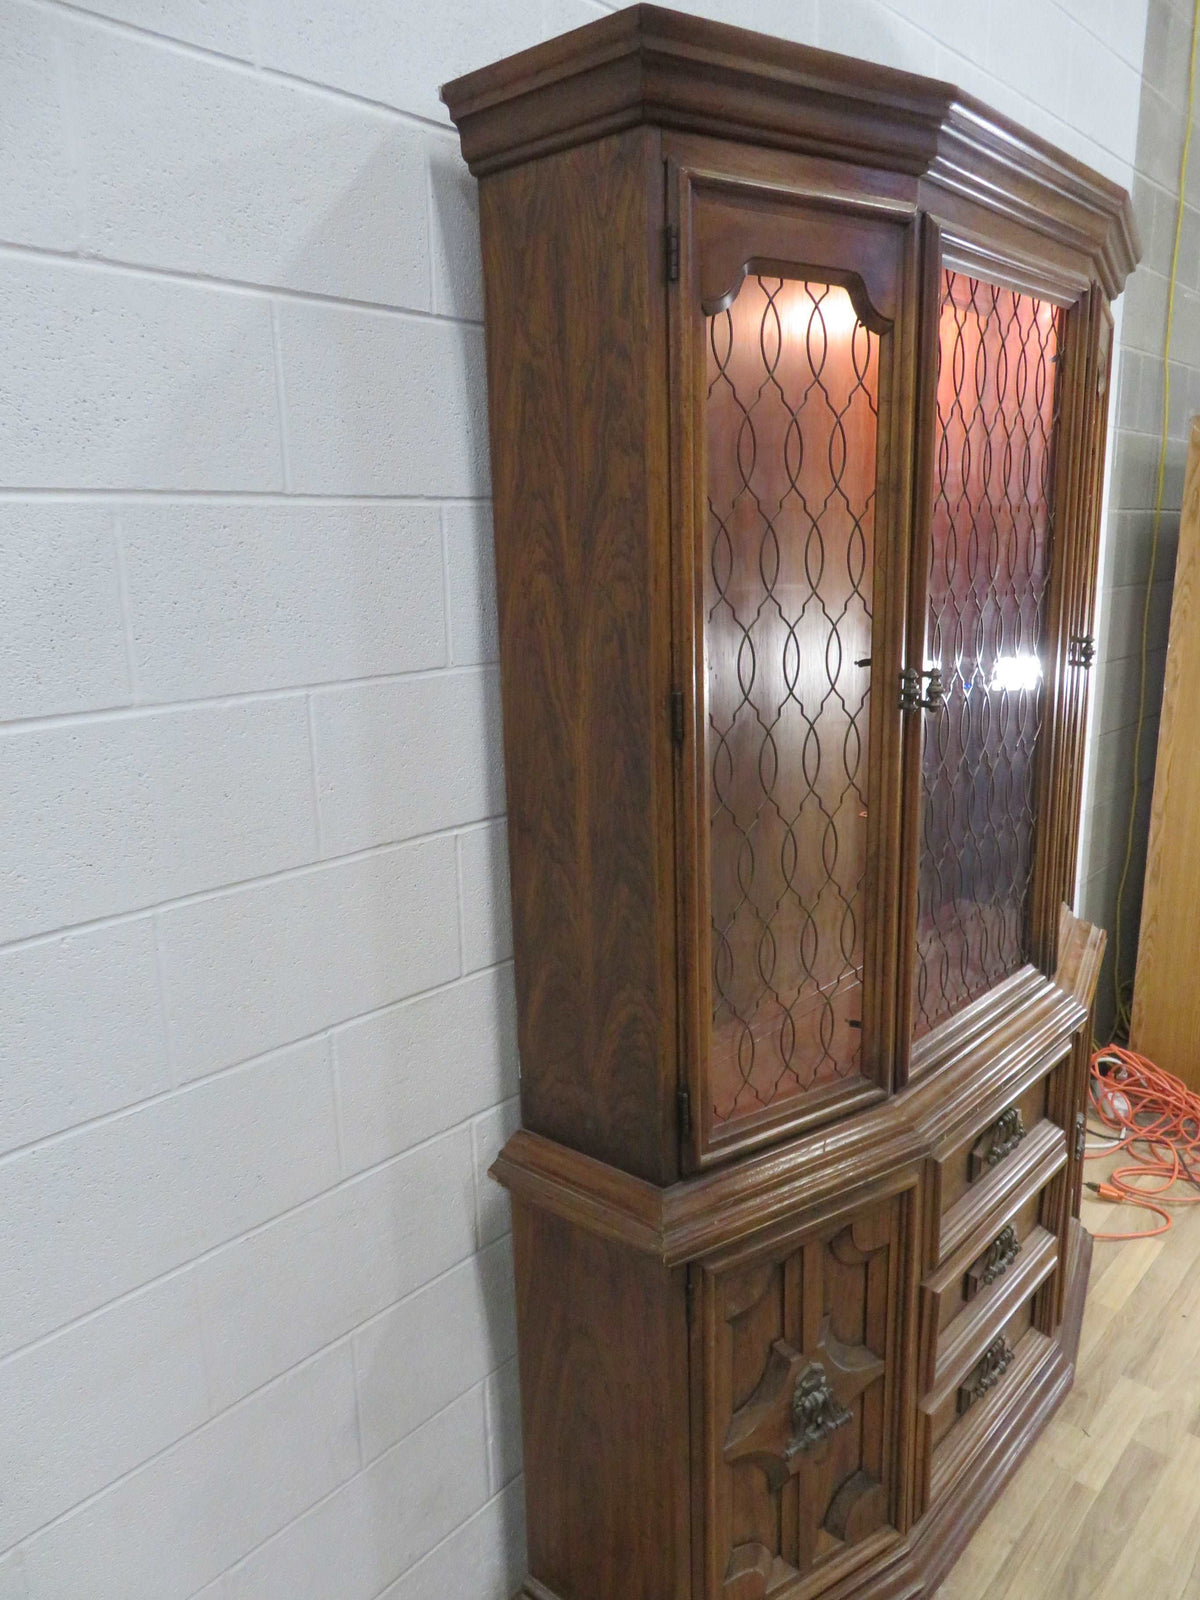 2-Piece Solid Wood China Cabinet with Glass Doors